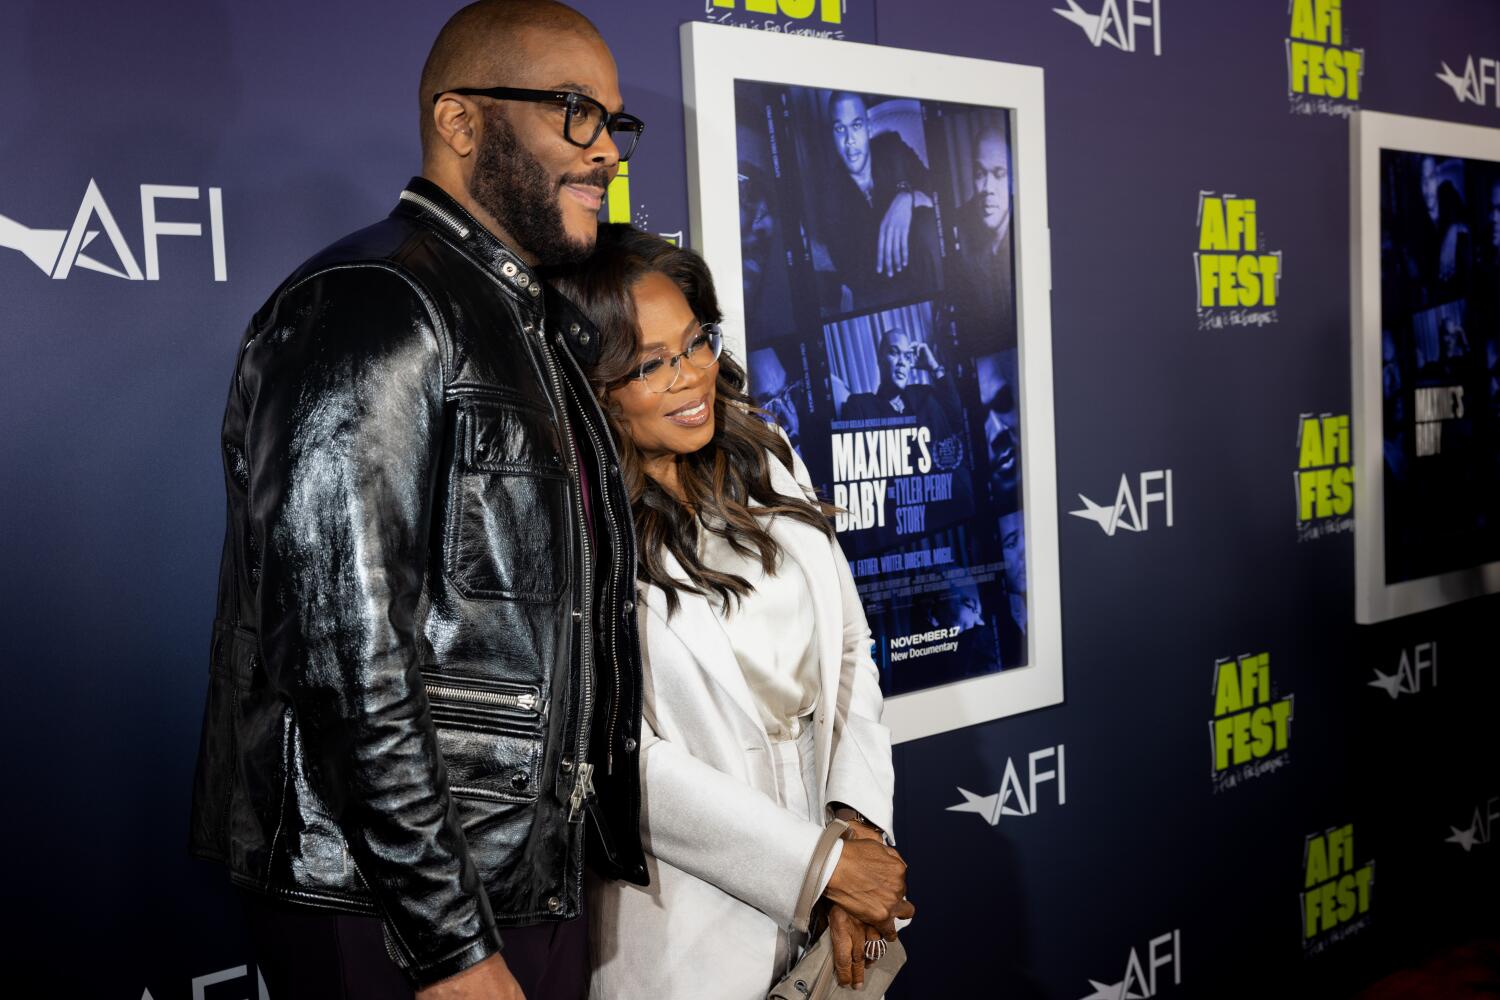 Photos | Tyler Perry and Oprah Winfrey on the red carpet for world premiere of 'Maxine's Baby: The Tyler Perry Story'